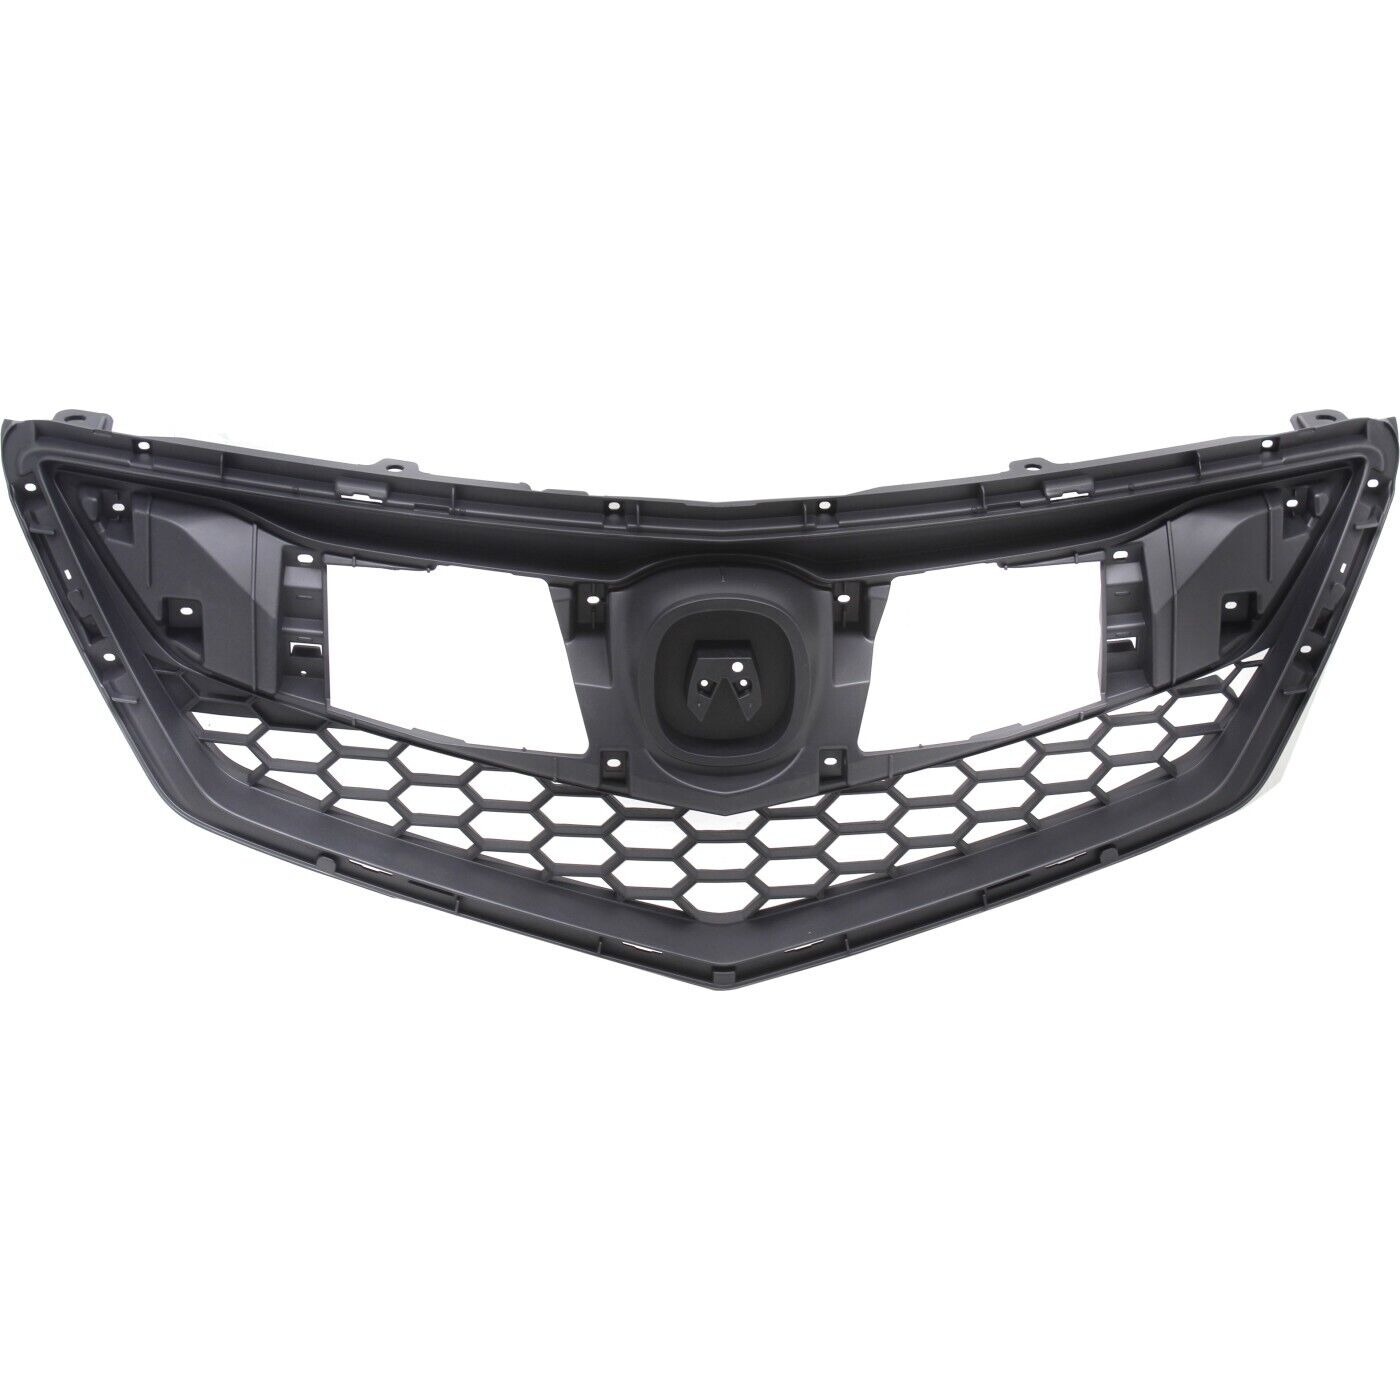 Grille Grill for Acura RDX 2016-2018